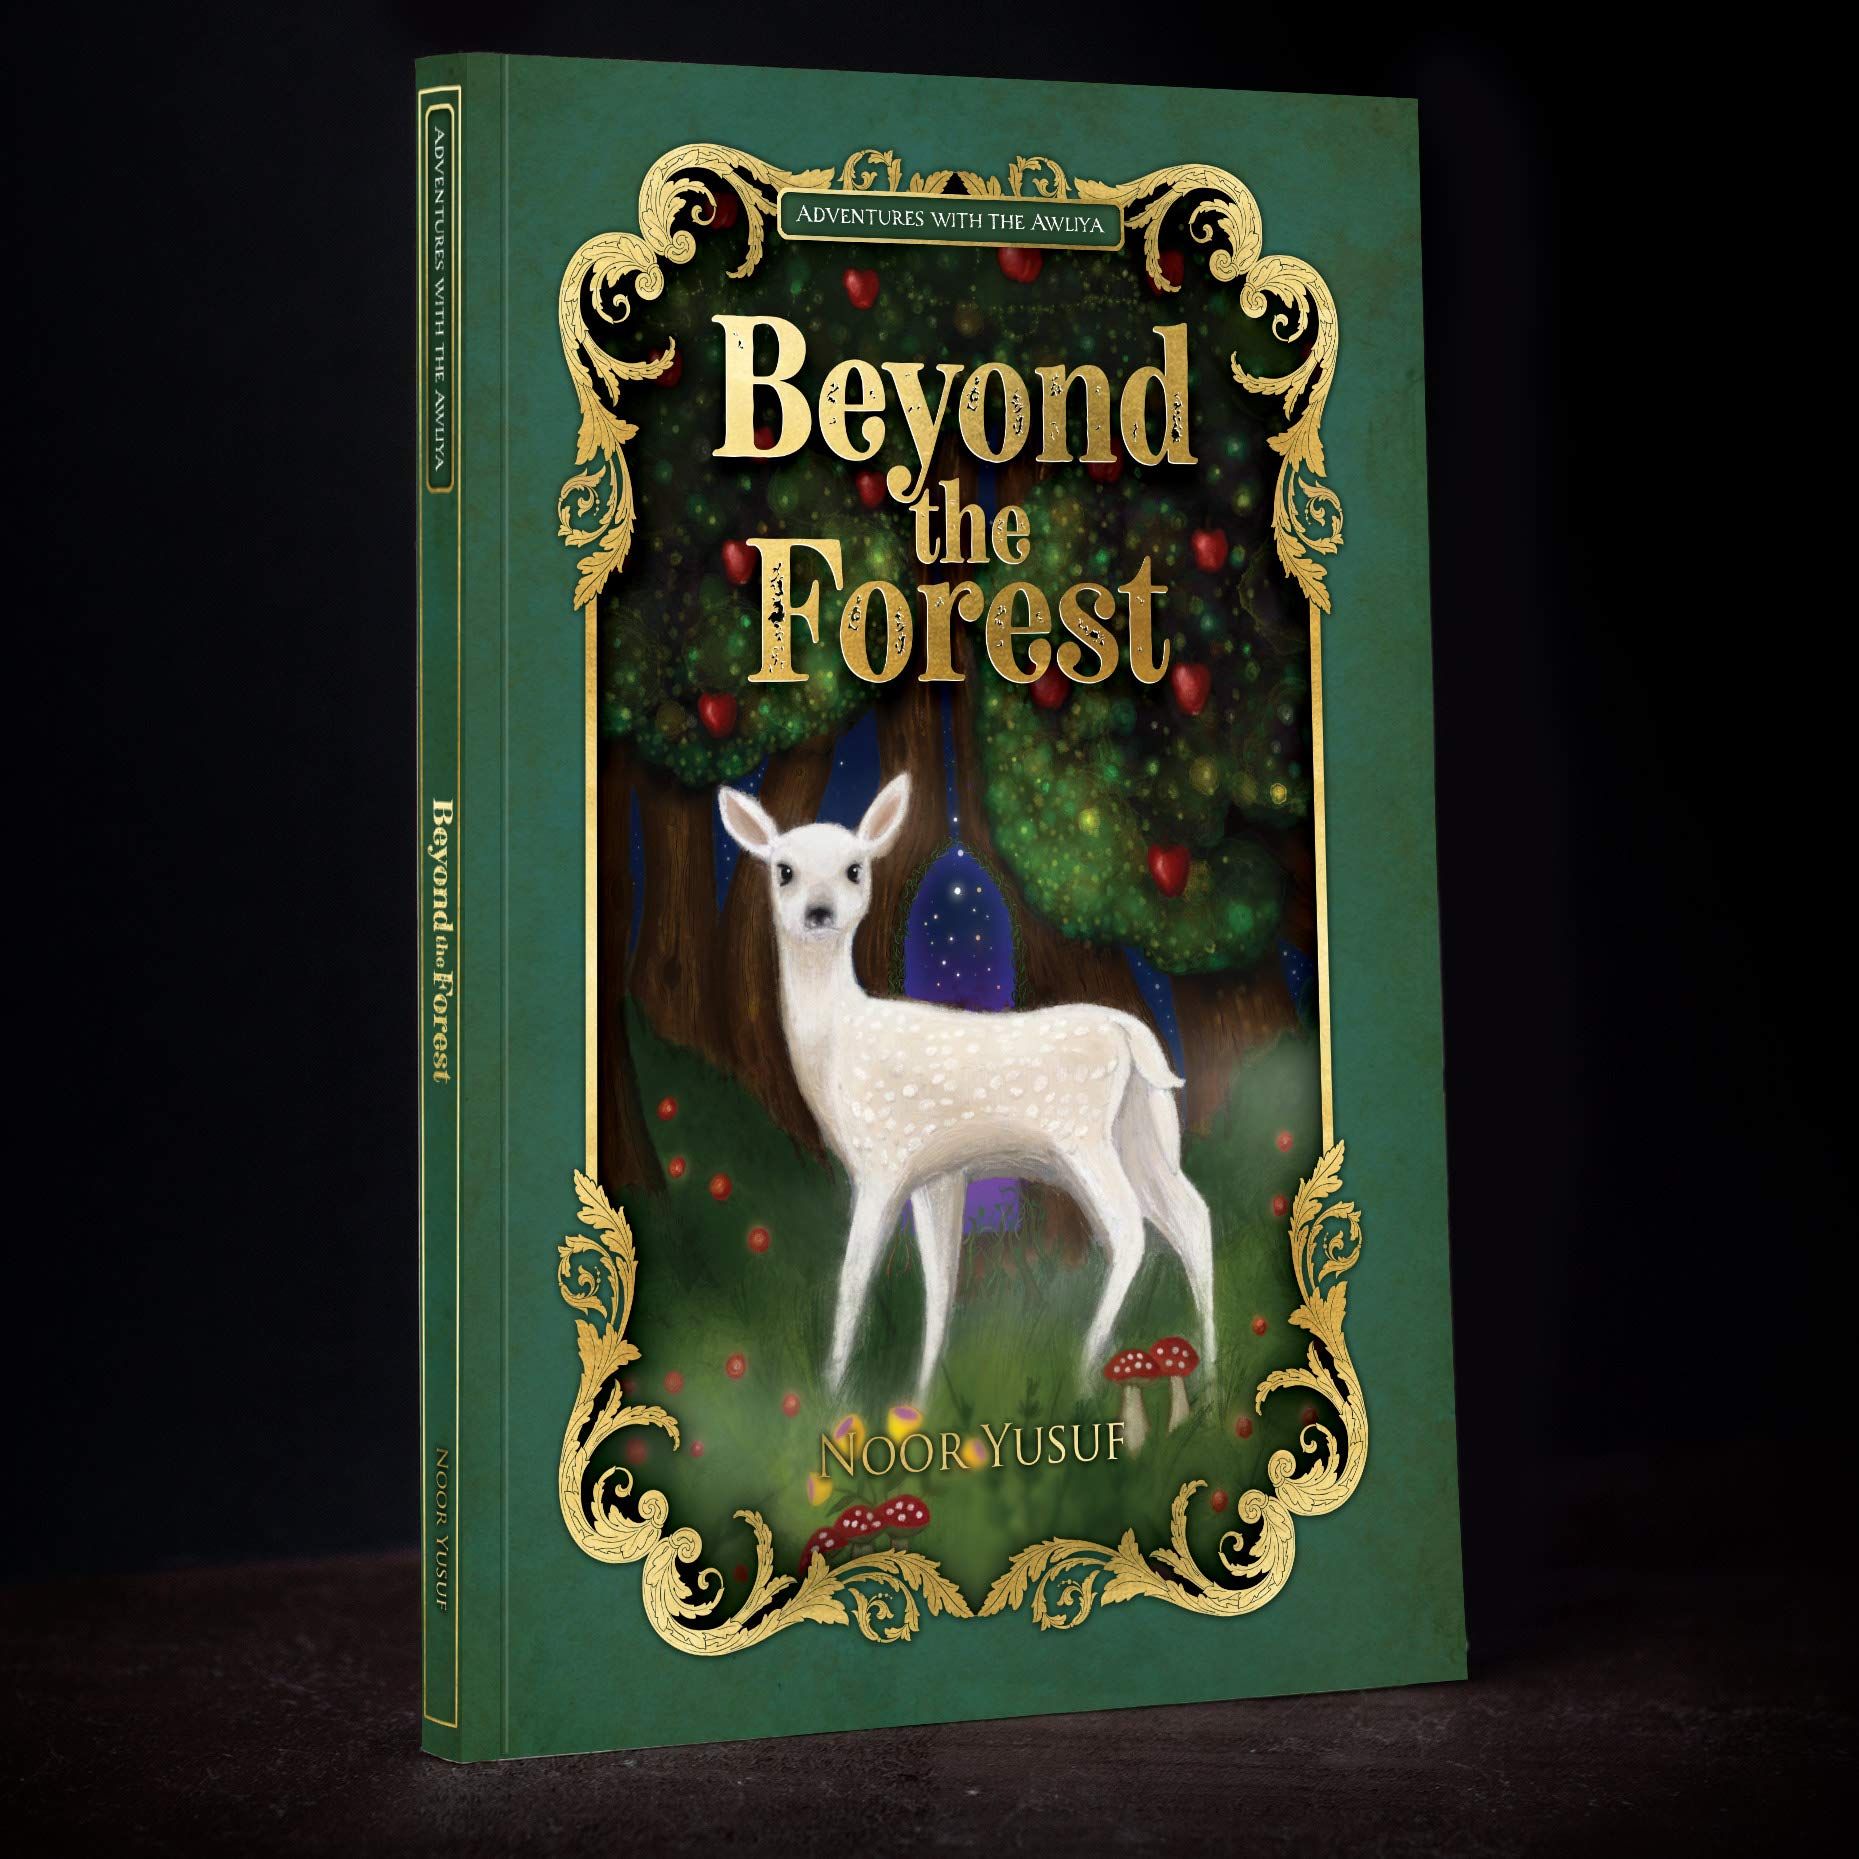 Beyond the Forest, Adventures with the Awliya Book 1